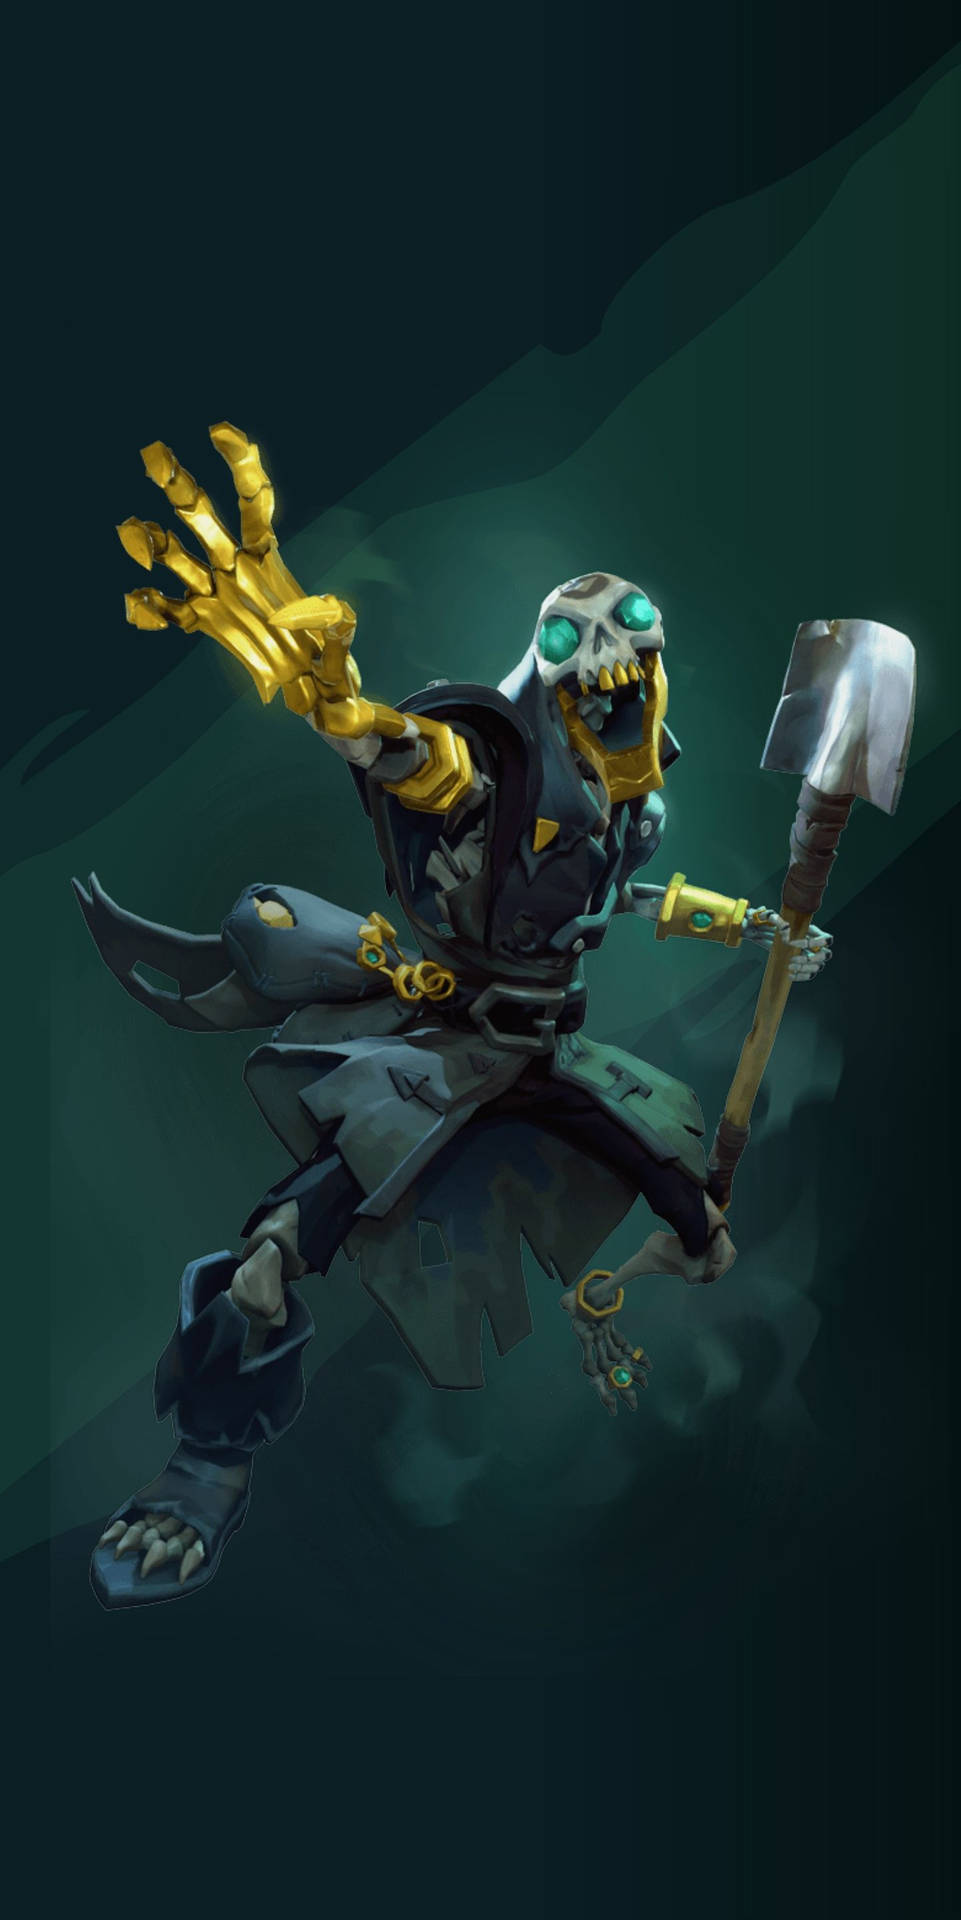 Challenge yourself with the Gold Hoarder Skeletons in Sea of Thieves Wallpaper